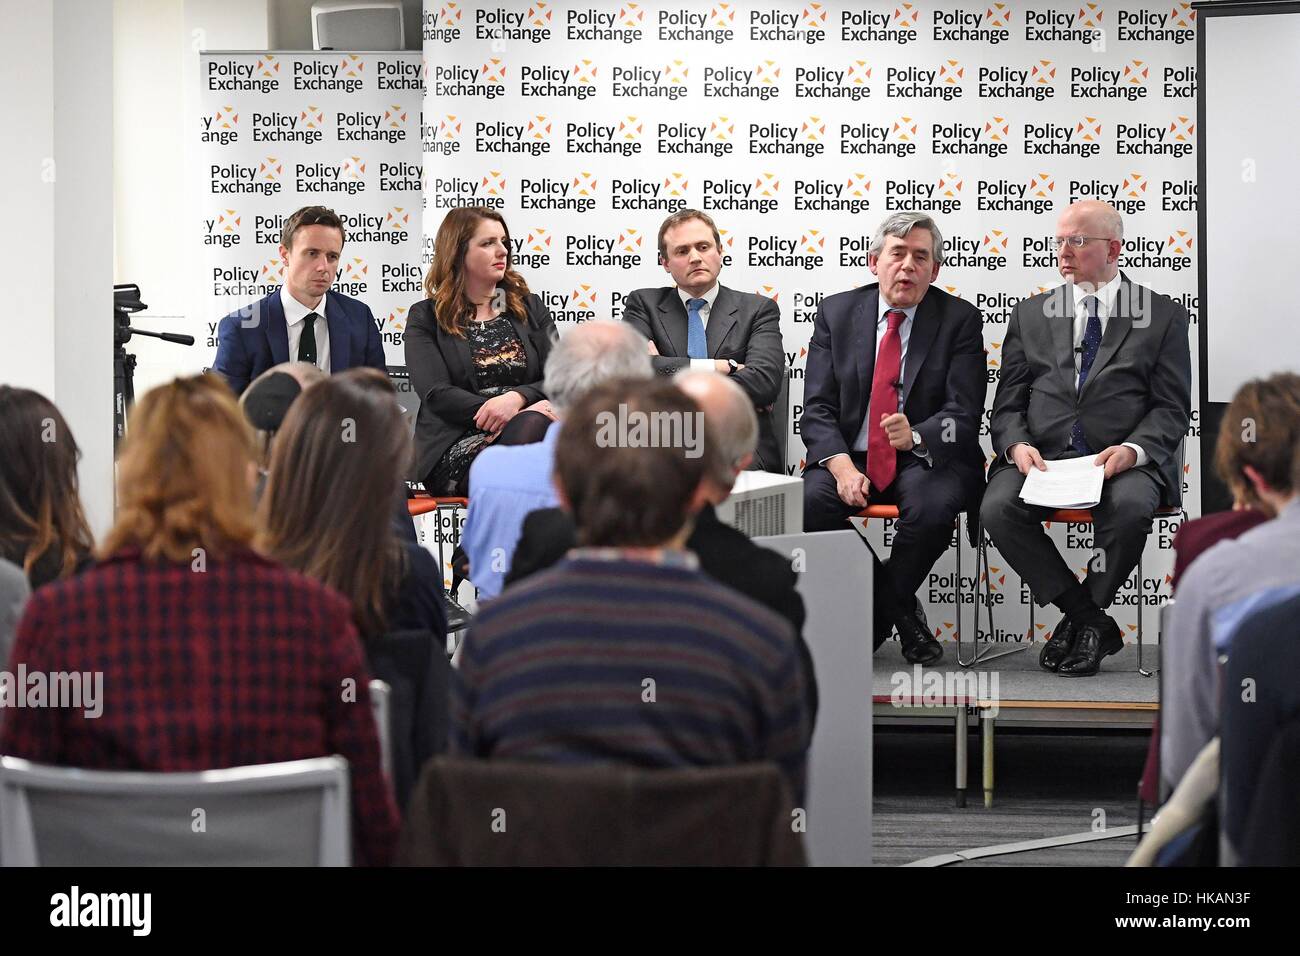 (left to right) Professor John Bew, Alison McGovern MP, Tom Tugendhat MP, former Prime Minister Gordon Brown and Director of the Policy Exchange Dean Godson at the launch of a new bipartisan report titled The Cost of Doing Nothing, co-authored by the late Jo Cox MP, at the Policy Exchange in Westminster, London. Stock Photo